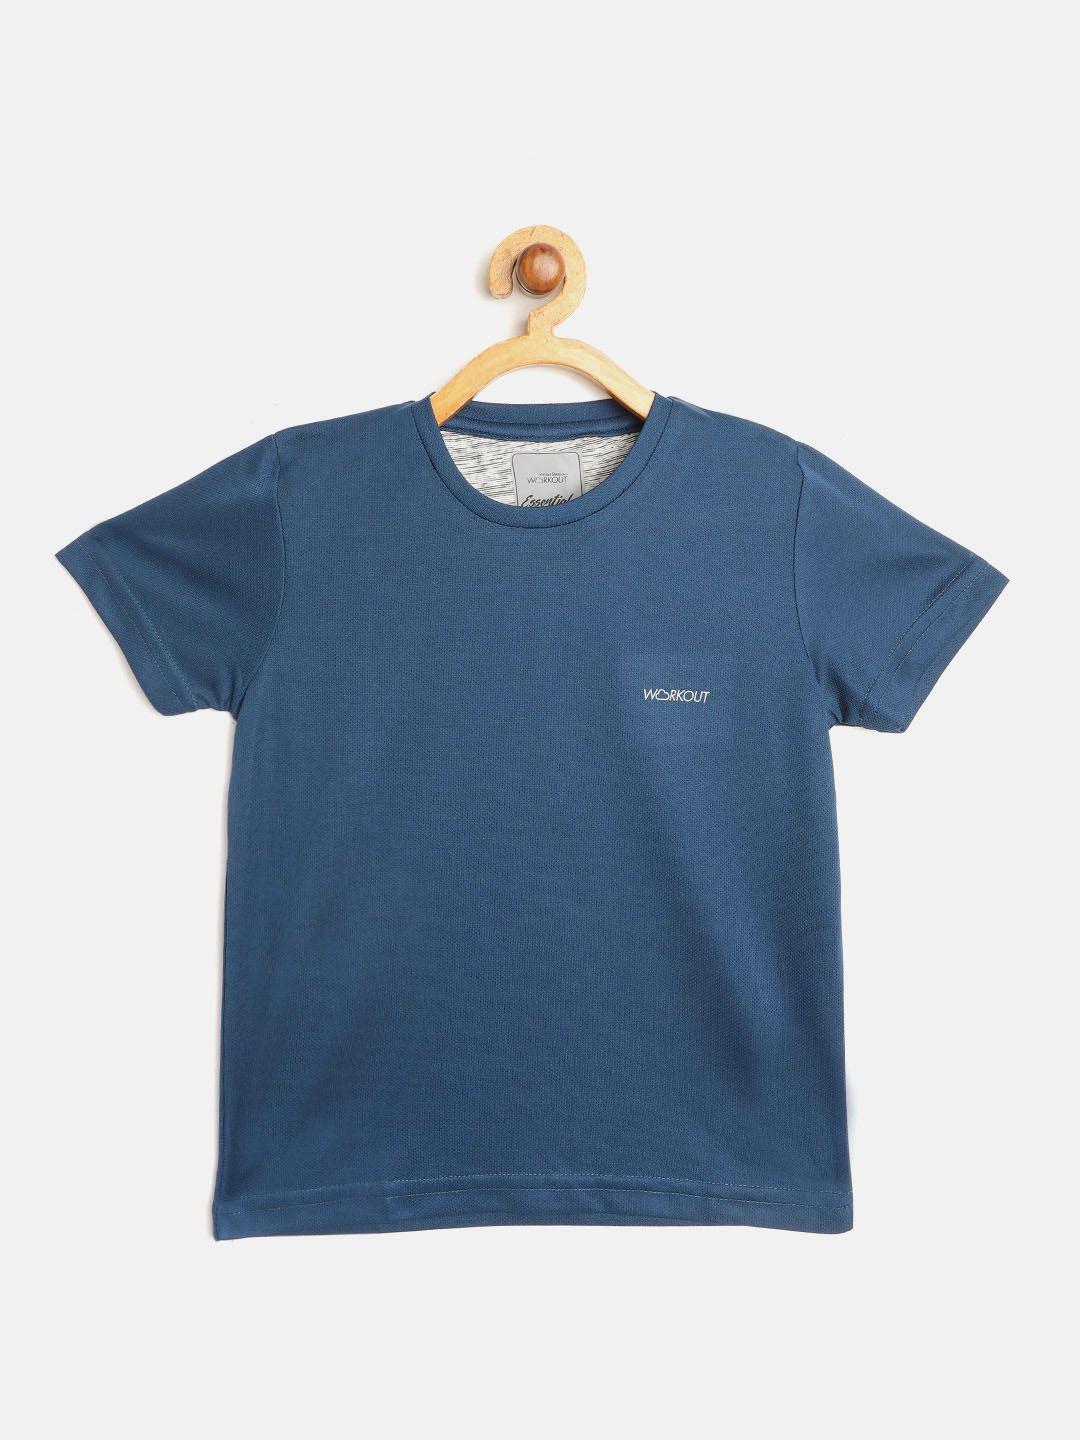 sweet-dreams-boys-teal-blue-solid-round-neck-workout-t-shirt